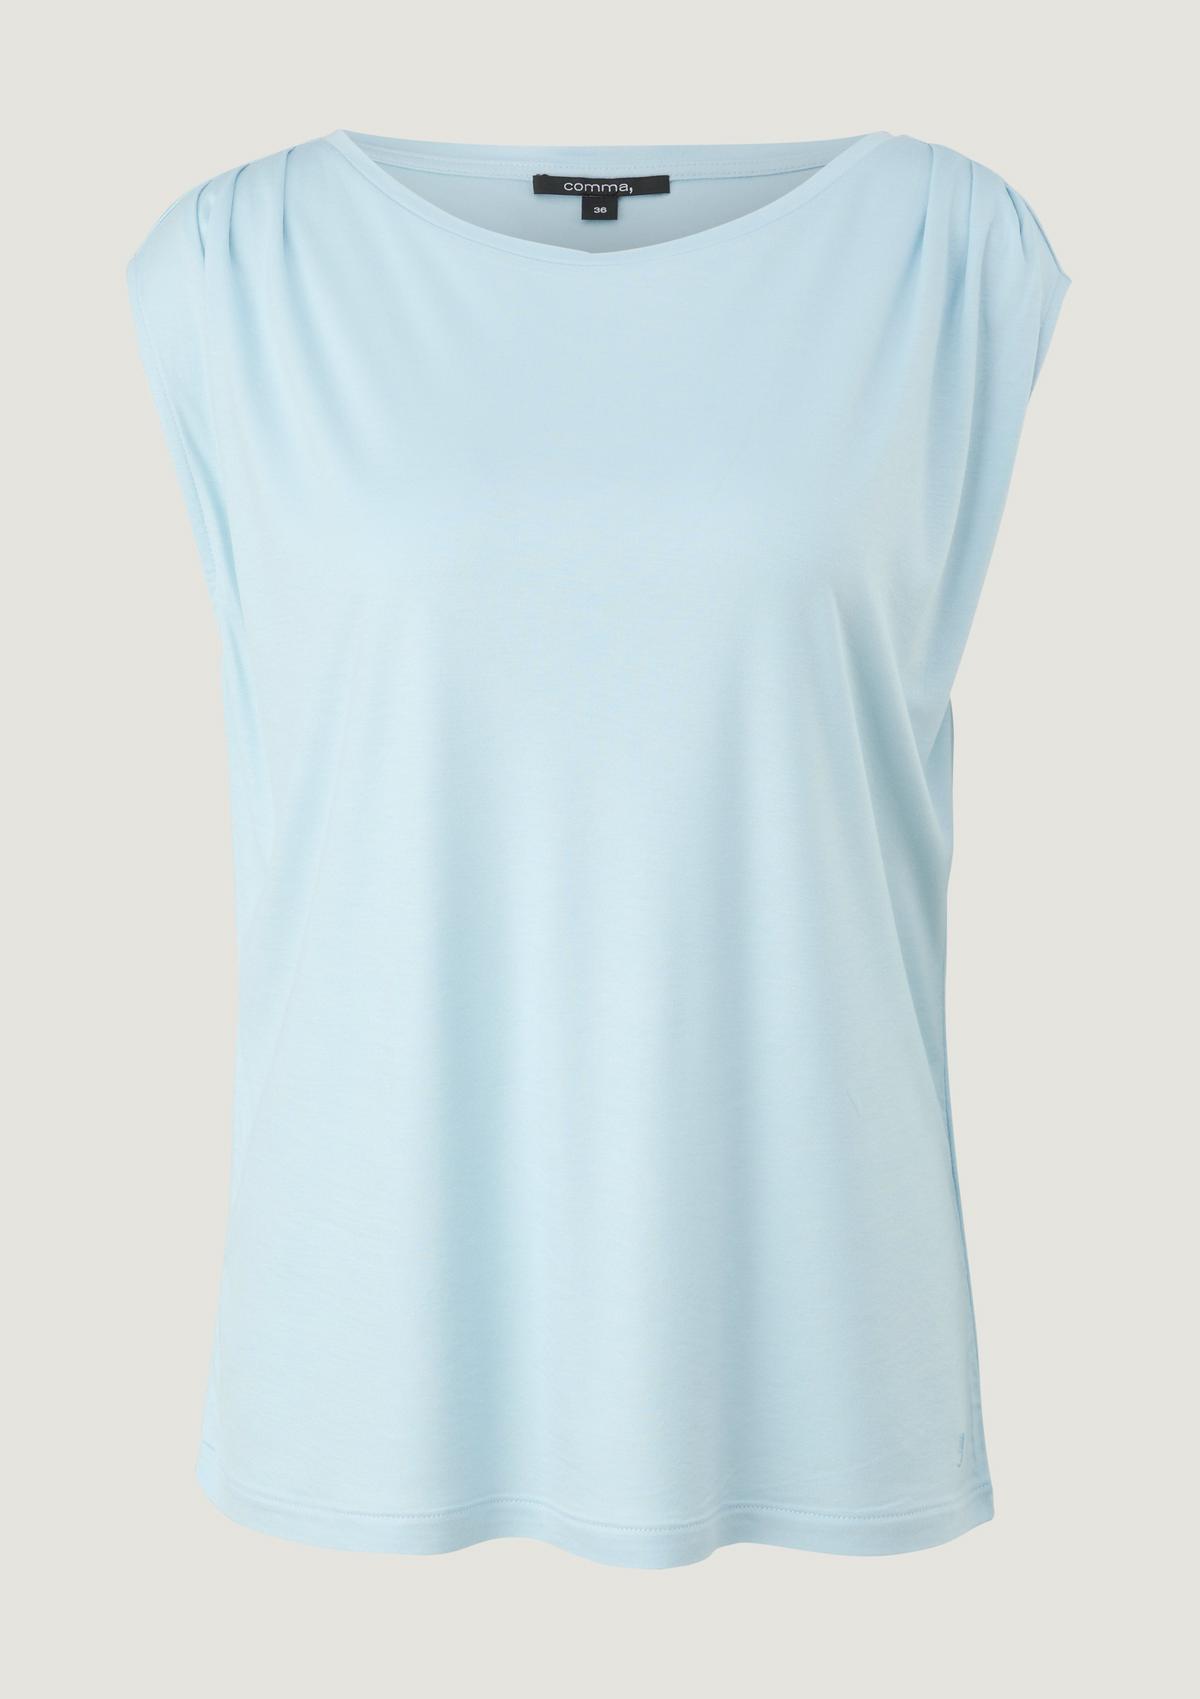 Shirts & Tops for Women | Comma